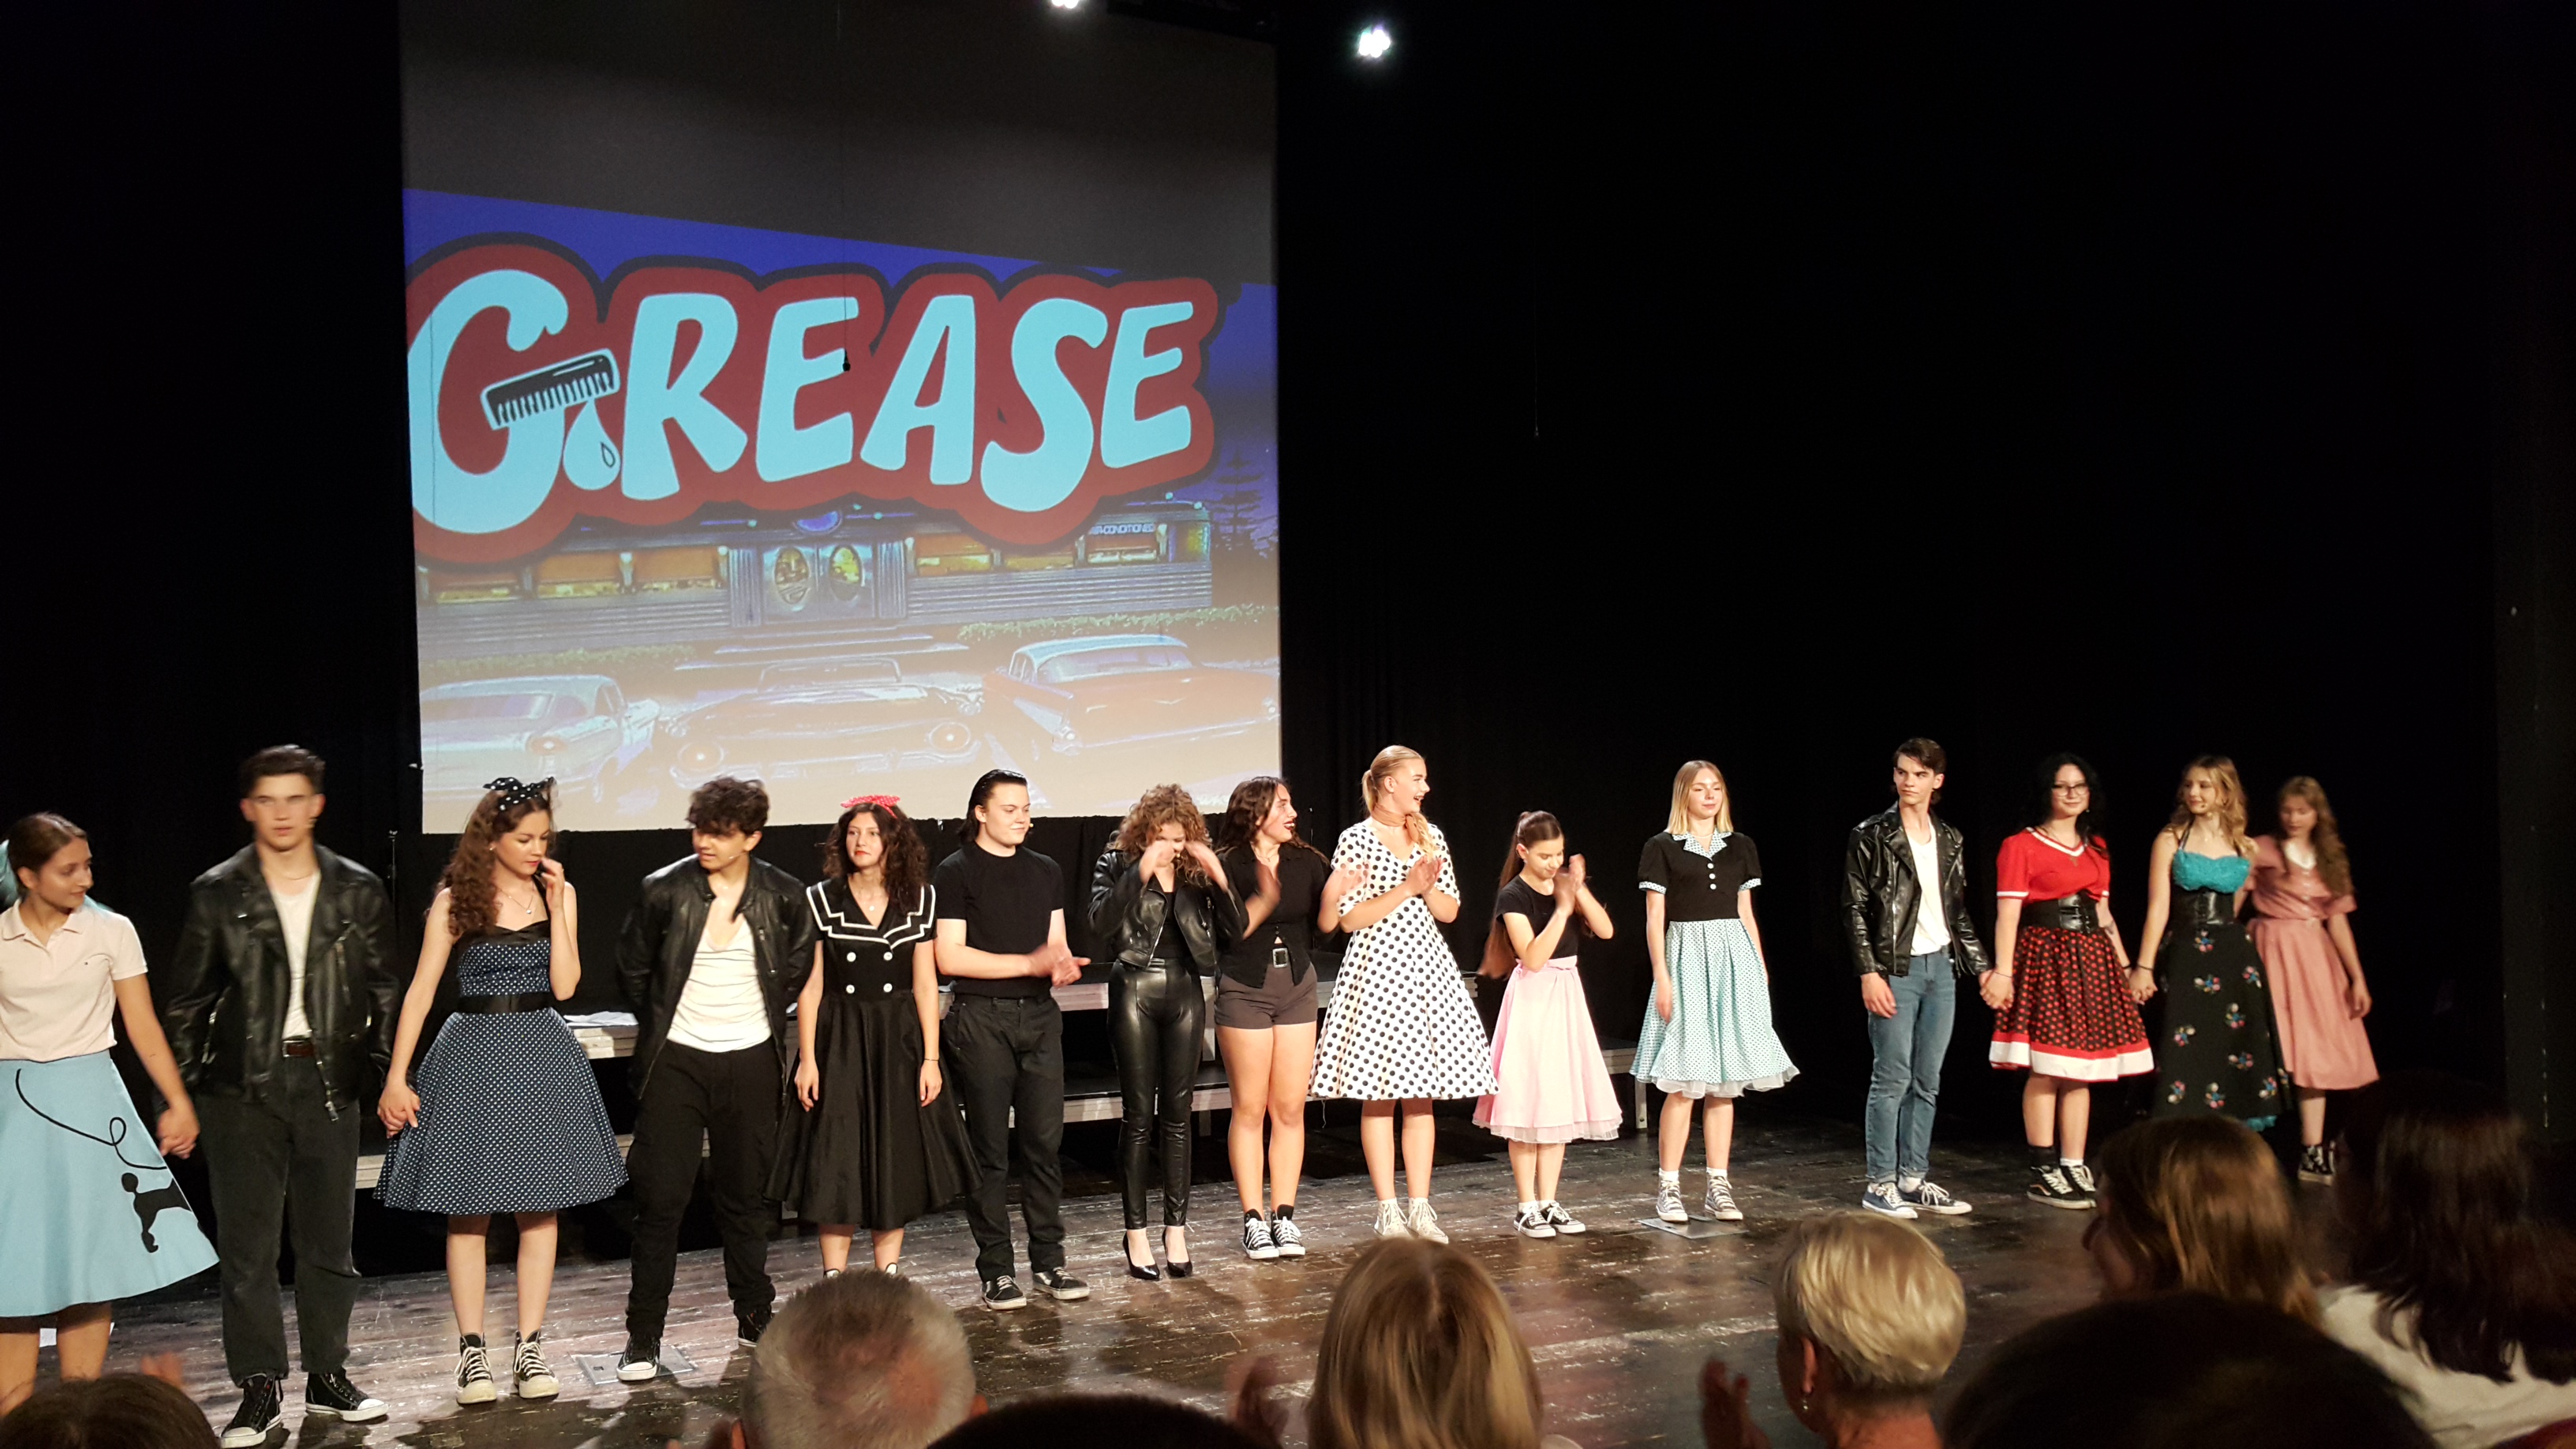 grease8